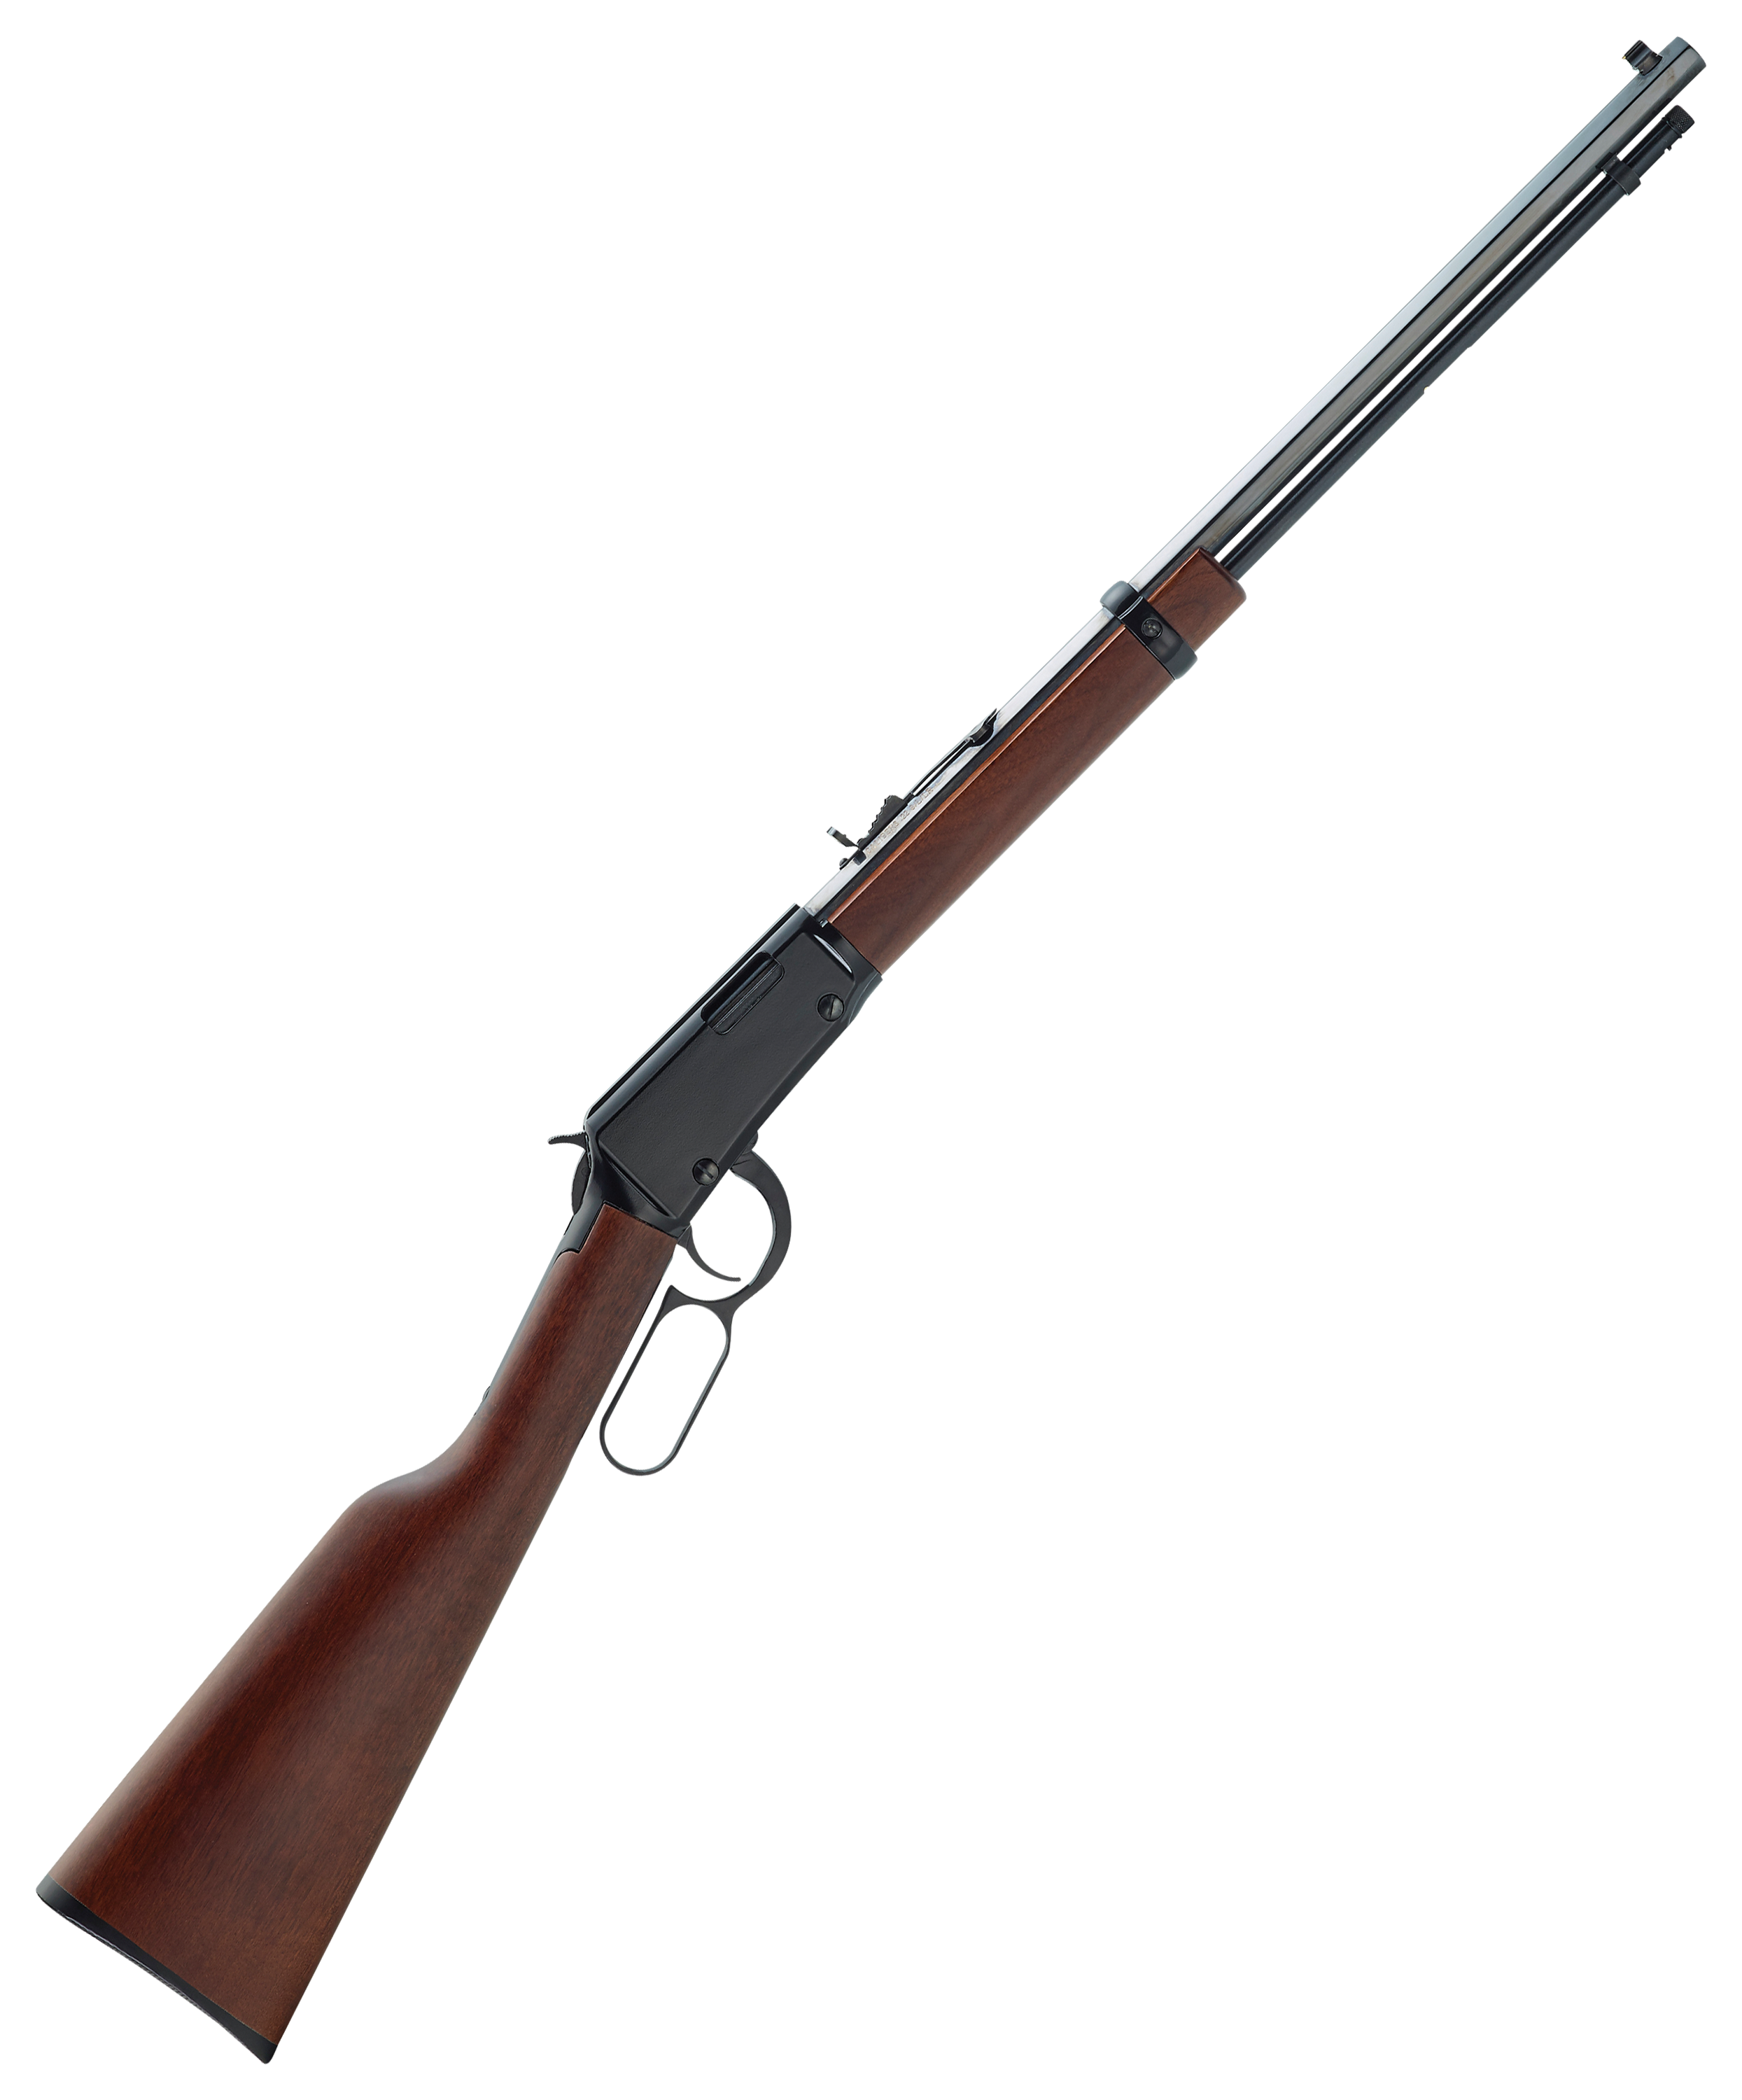 Henry Frontier Blued Lever Action Rifle - 17 HMR - 20in - Brown -  H001TV